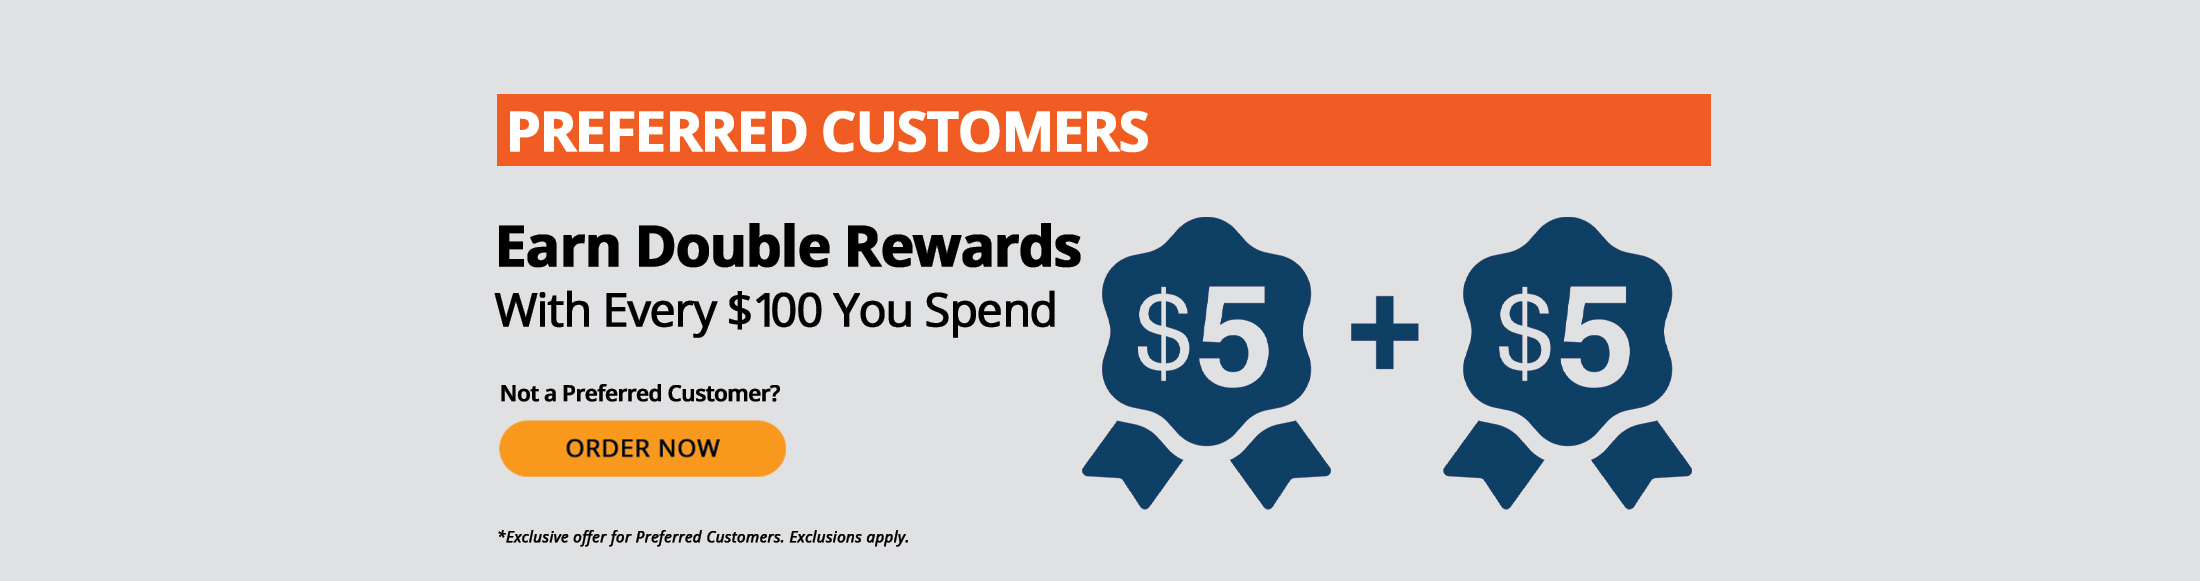 Preferred Customers earn double rewards with every $100 you spend, such as $5 + $5. Not a Preferred Customer? Order Now. *Exclusive offer for Preferred Customers. Exclusions apply.